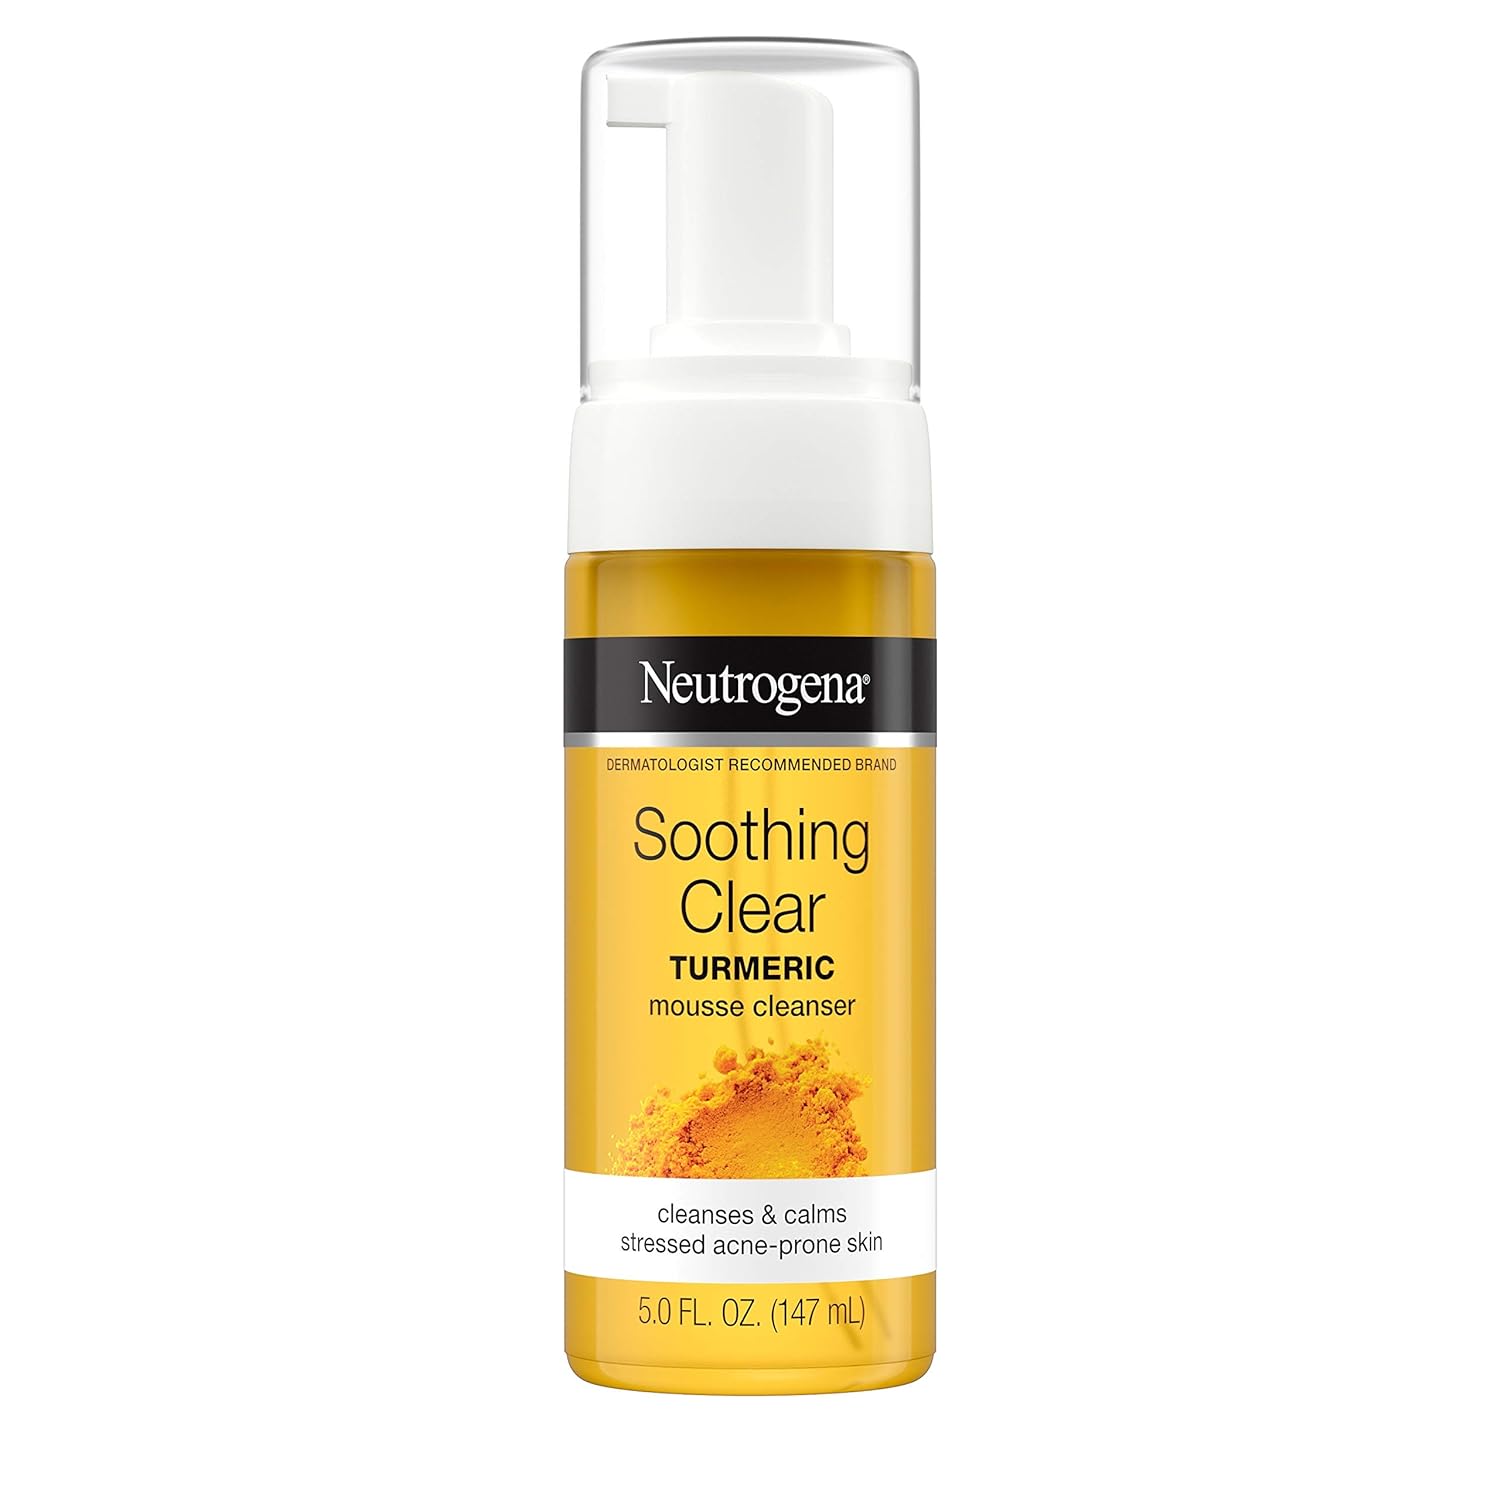 Neutrogena Soothing Clear Calming Mousse Facial Cleanser with Soothing & Calming Turmeric - 5 fl. oz